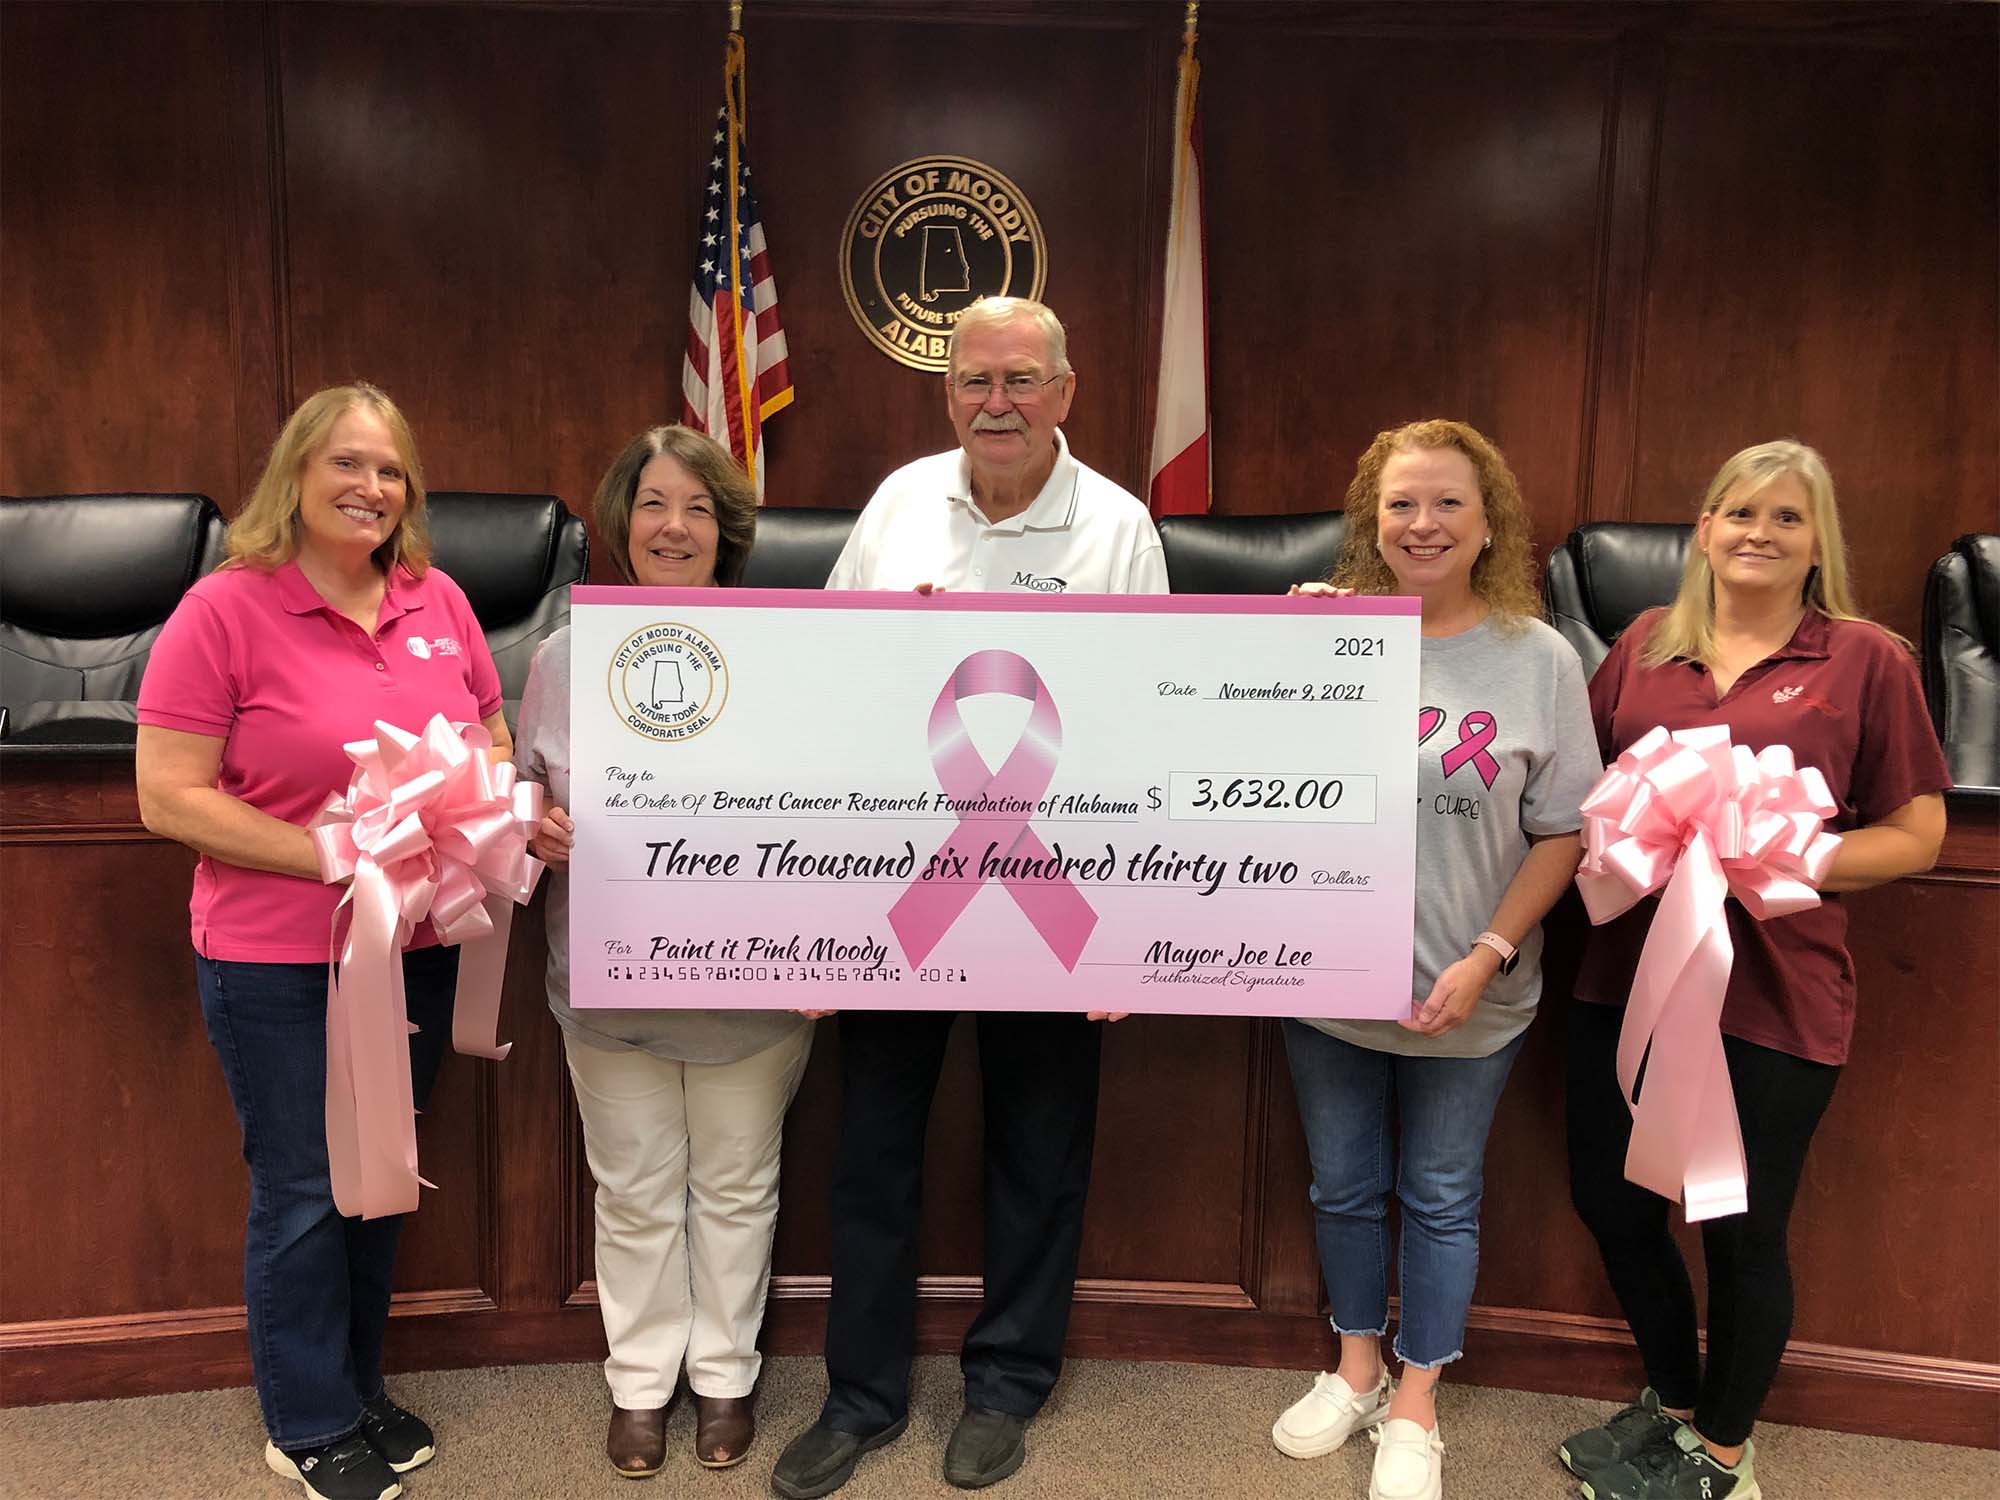 Moody presents check to the Breast Cancer Research Foundation of Alabama